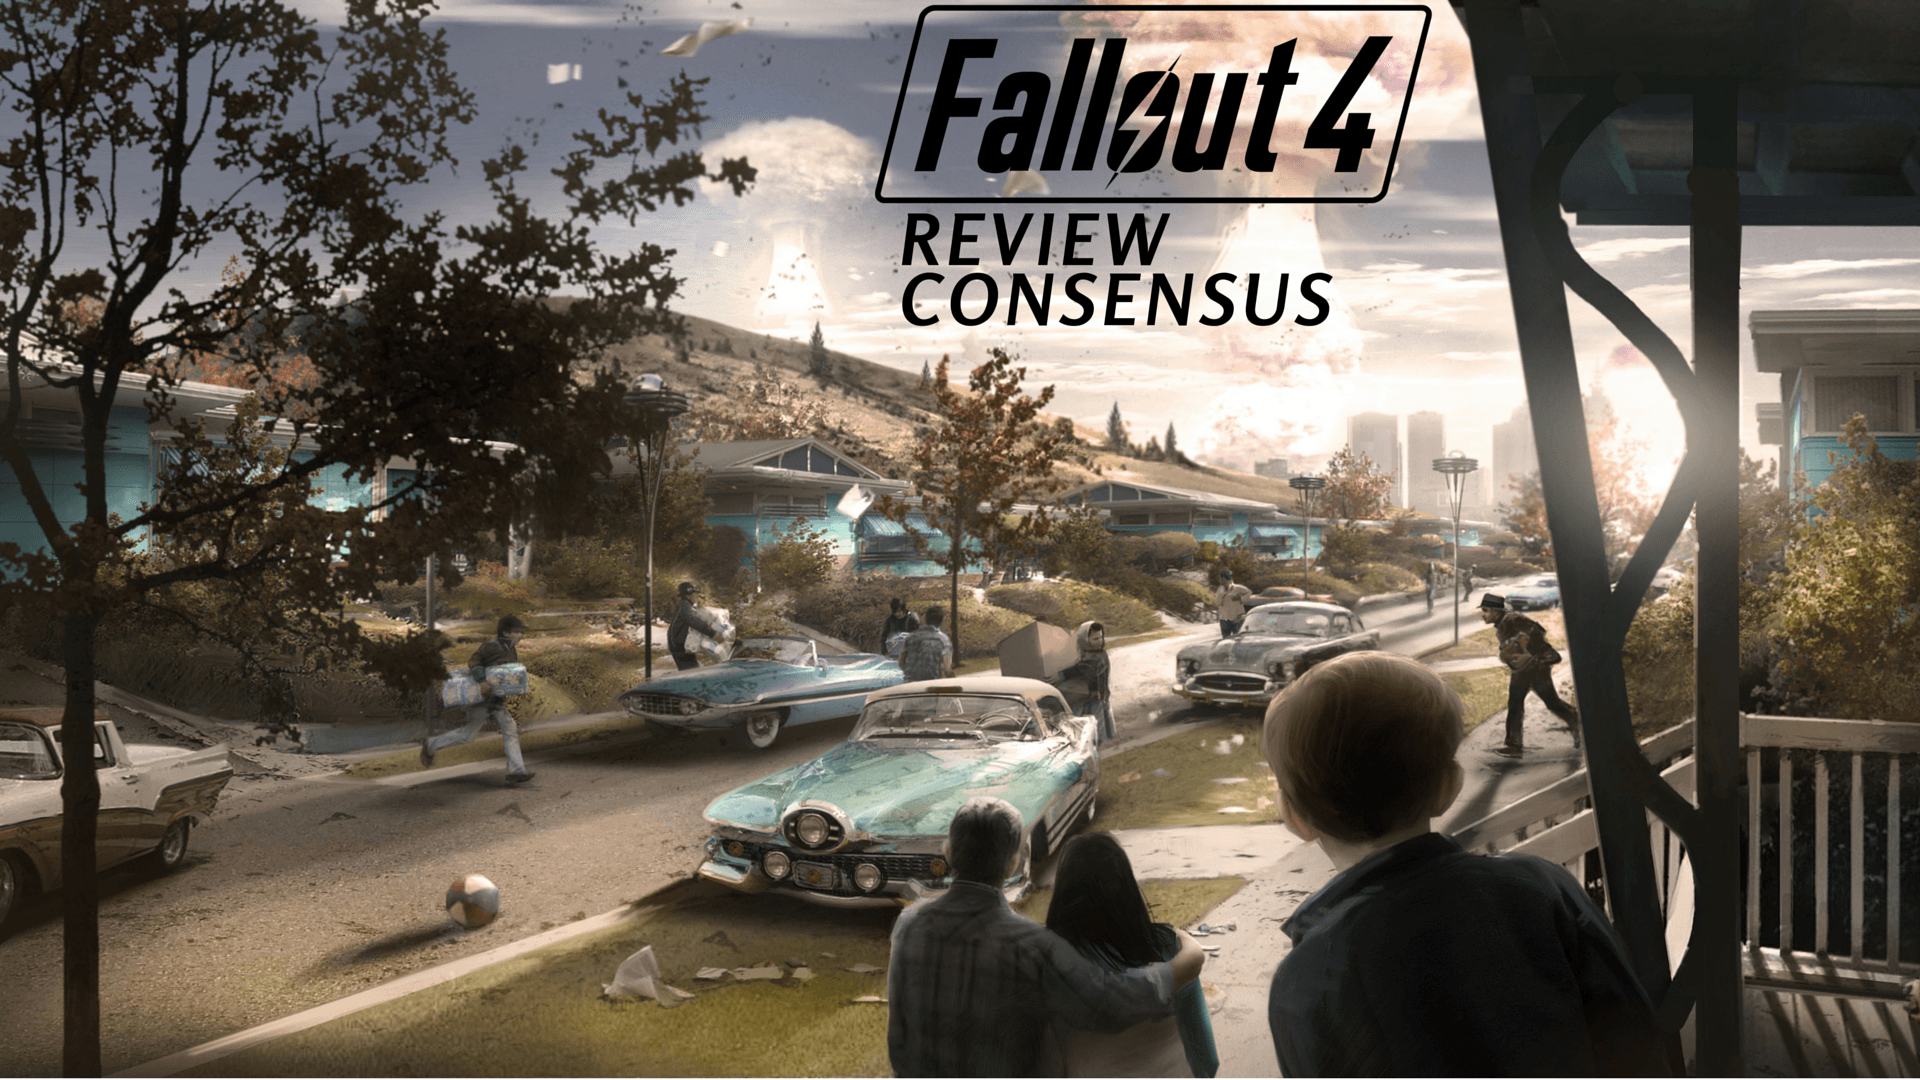 Is Fallout 4 Good? Check Out The General Consensus Here!